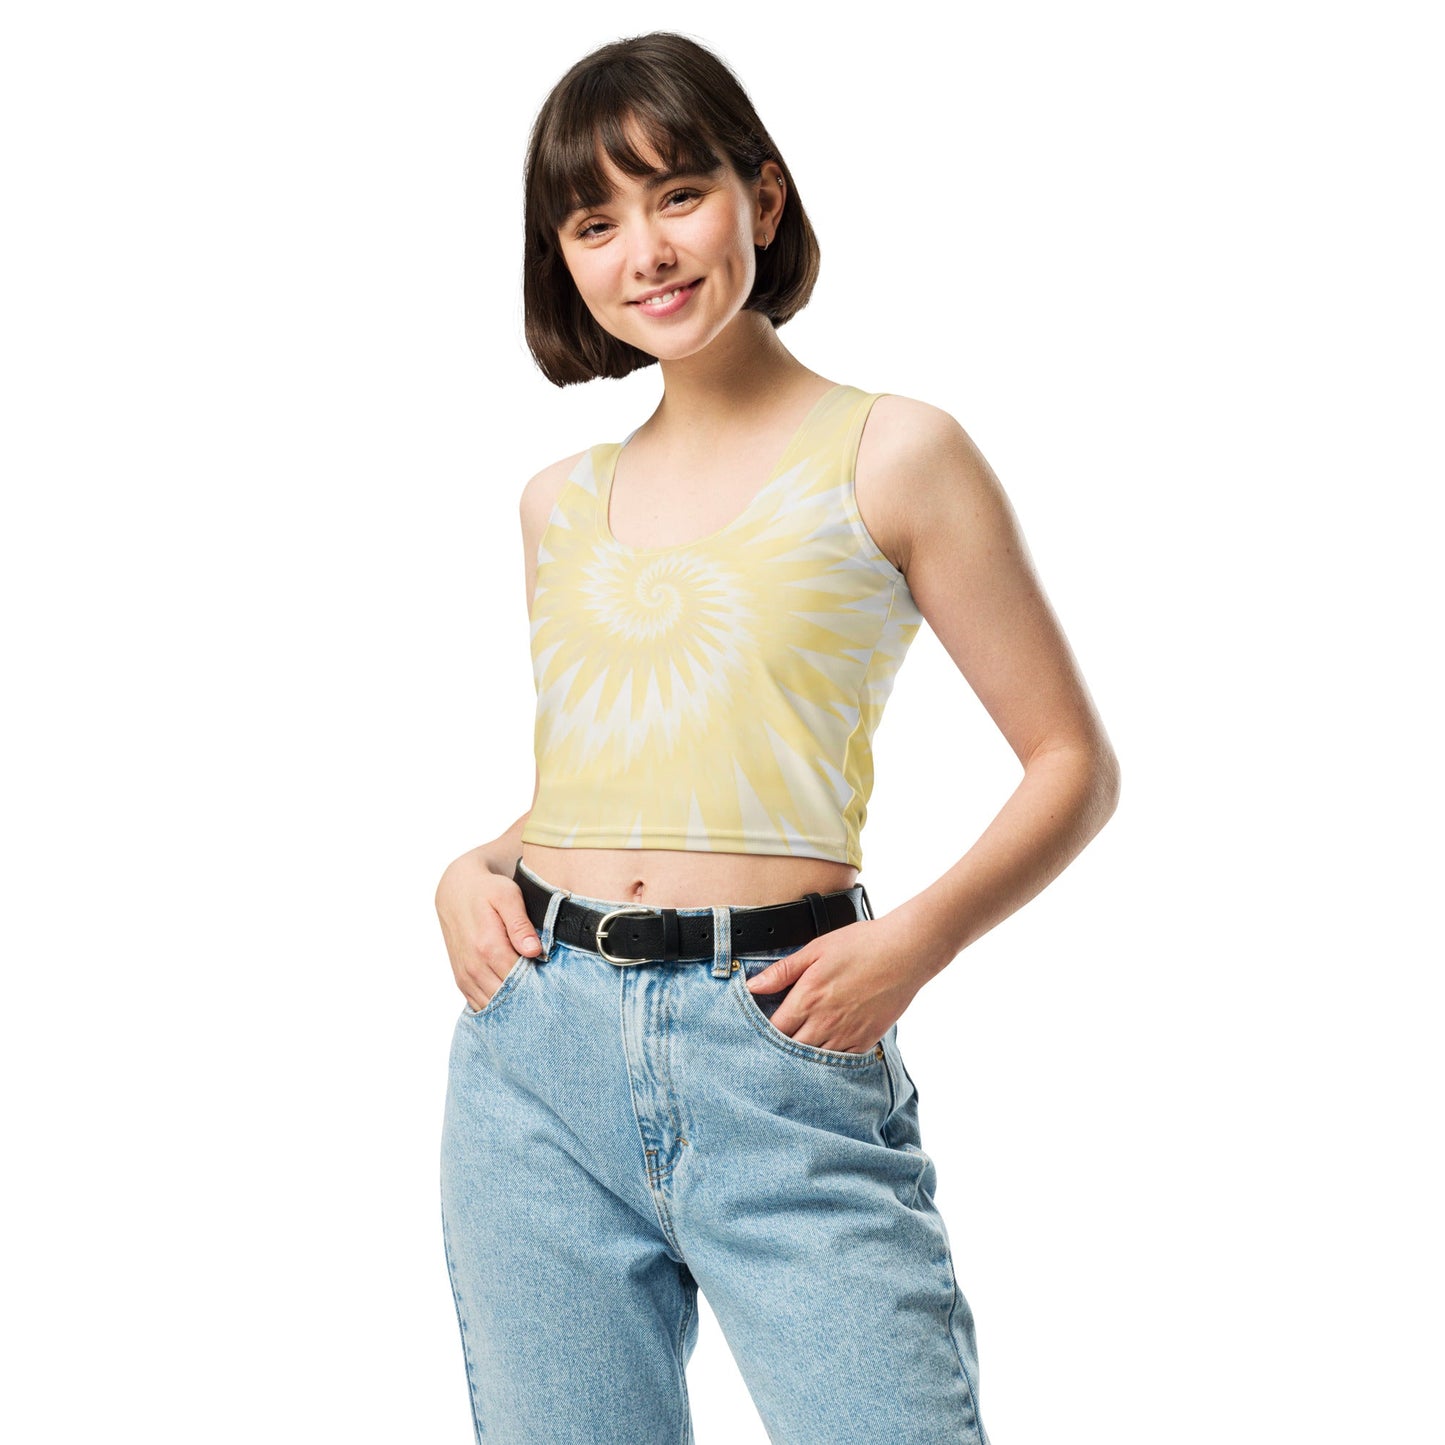 Be Extra! Silky Sun Tie-Dye Crop Top - BeExtra! Apparel & More